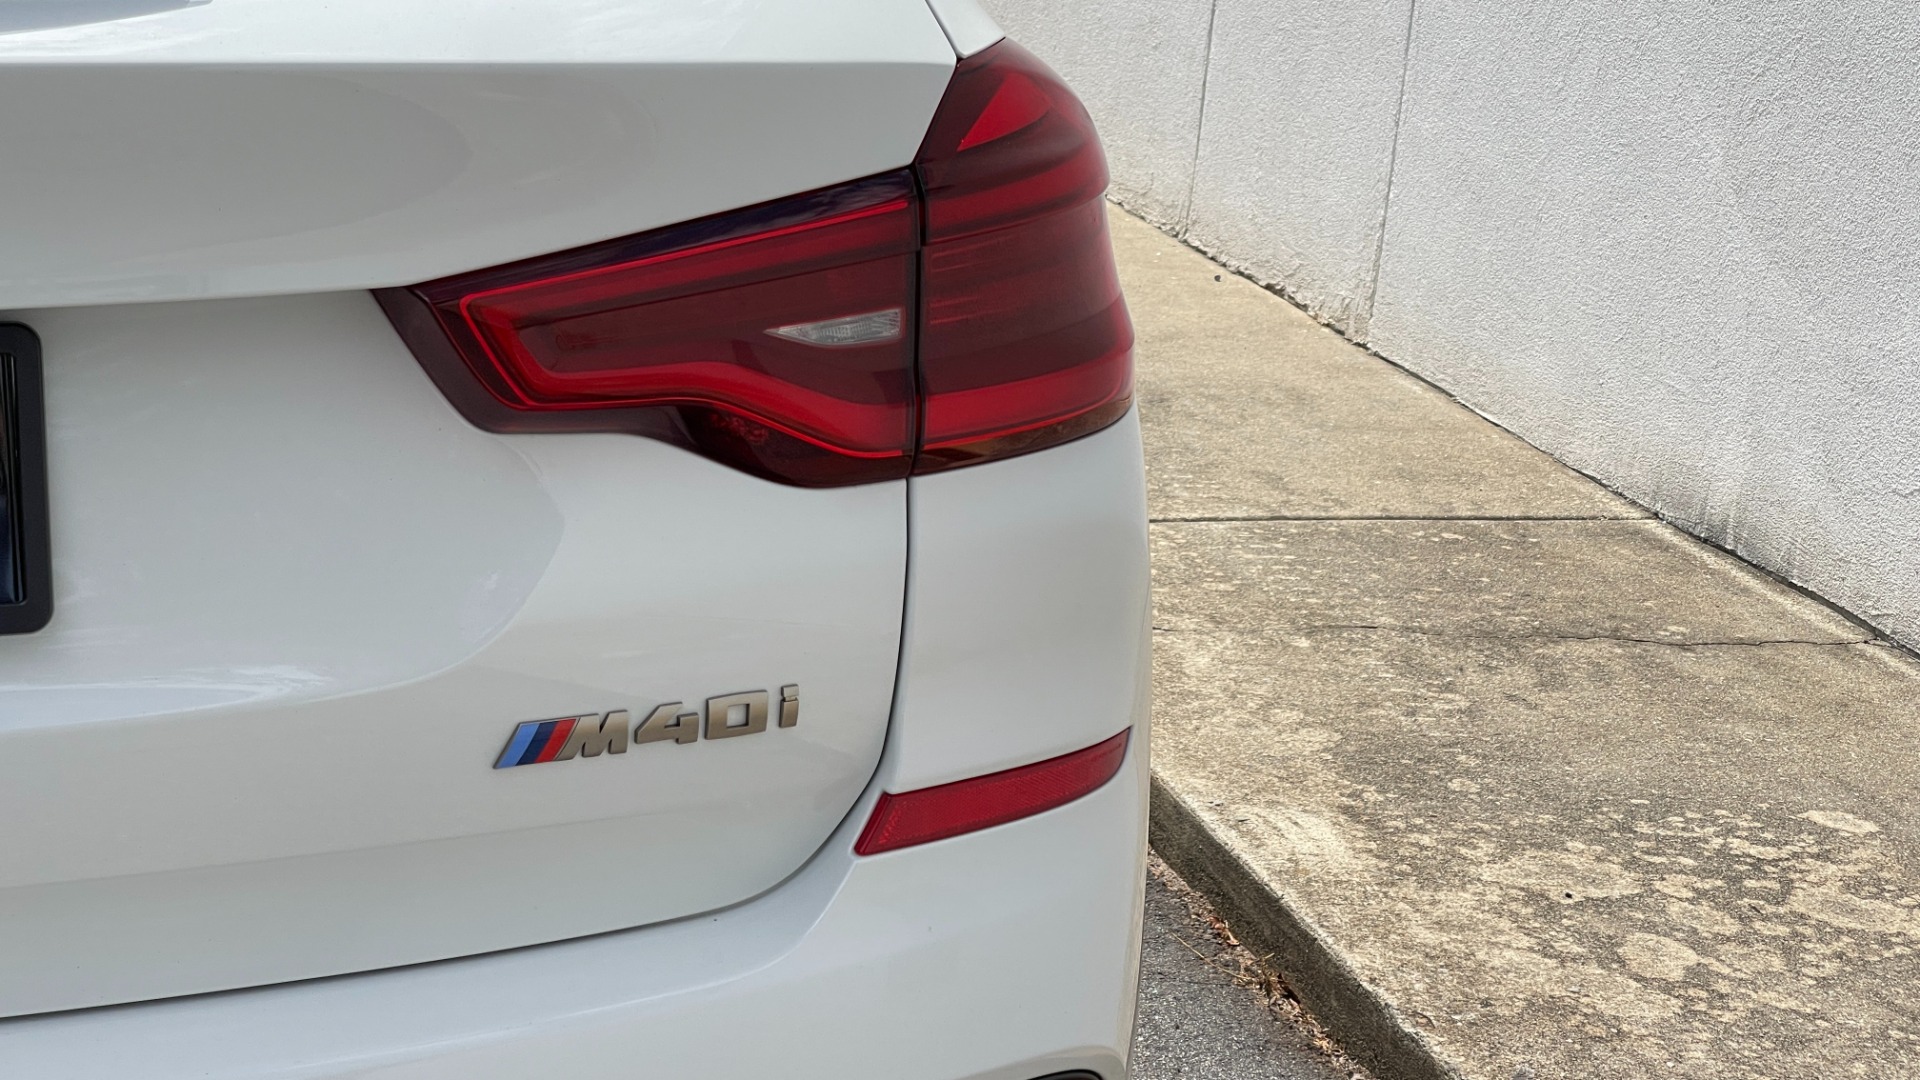 Used 2021 BMW X3 M40i / EXECUTIVE PACKAGE / SHADOWLINE TRIM / HEADS UP DISPLAY / AMBIENT LIG for sale $57,392 at Formula Imports in Charlotte NC 28227 19